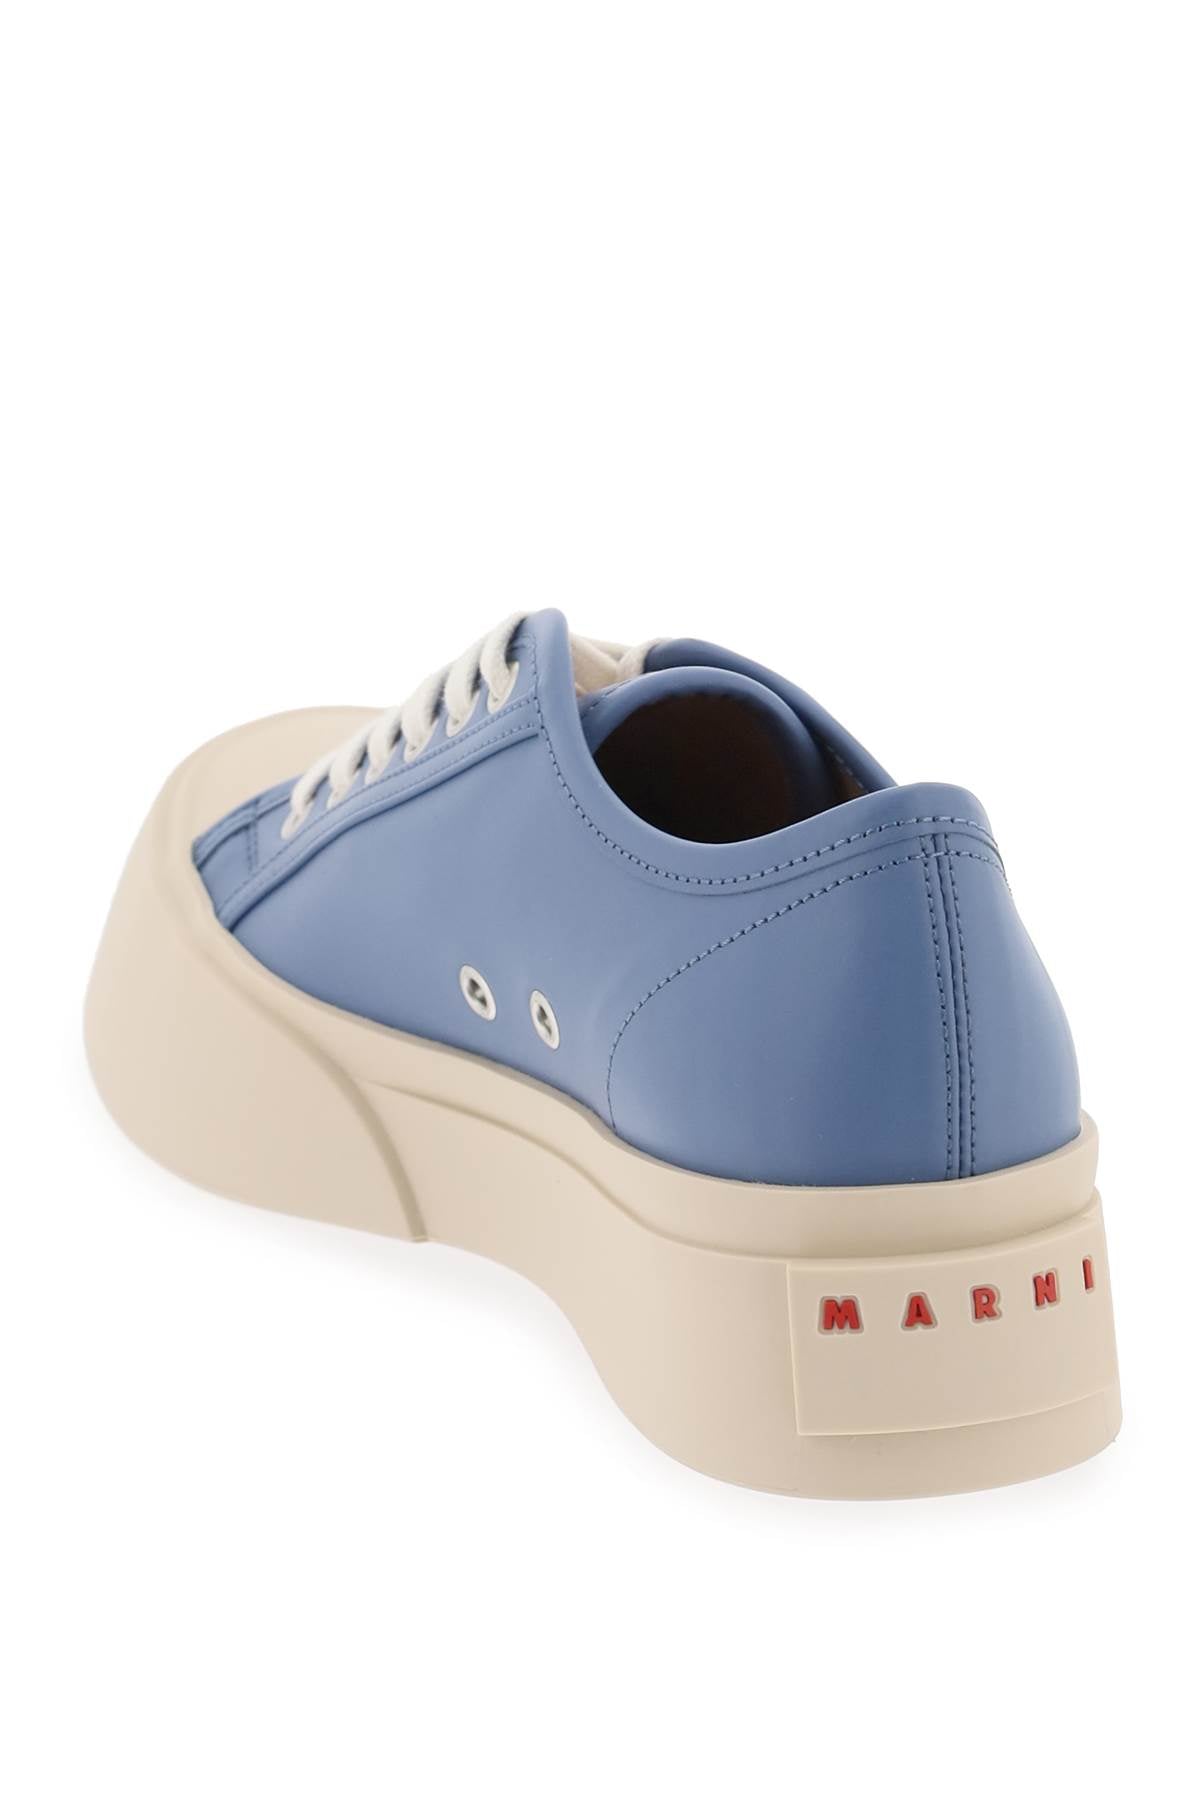 Marni leather pablo sneakers-2